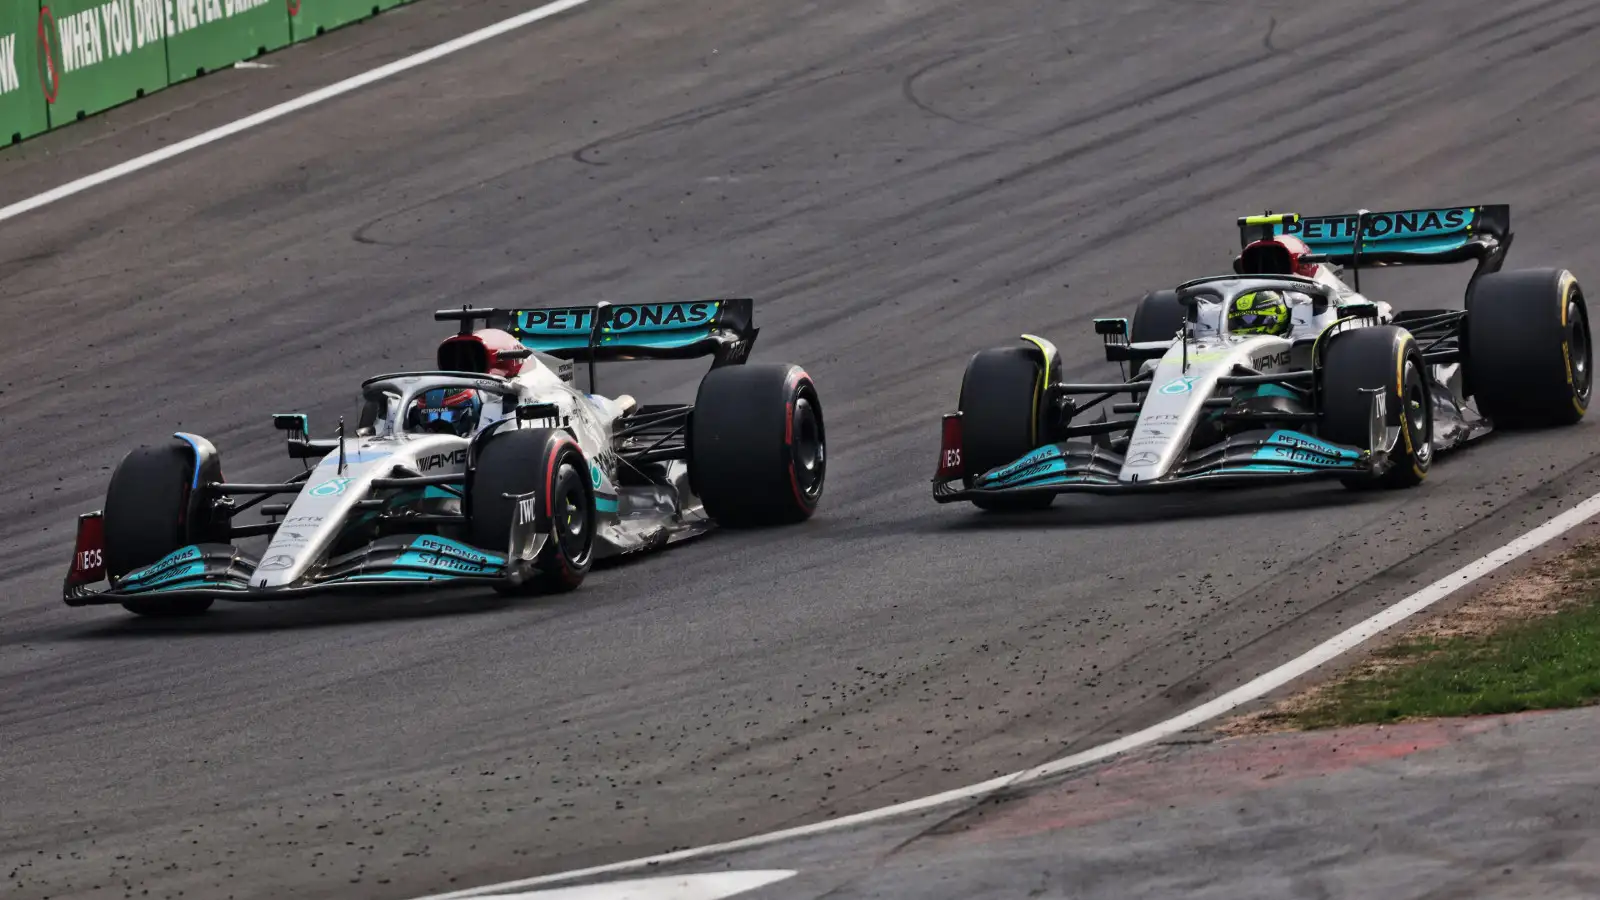 Mercedes' George Russell passes Lewis Hamilton during the Dutch Grand Prix. Zandvoort, September 2022.